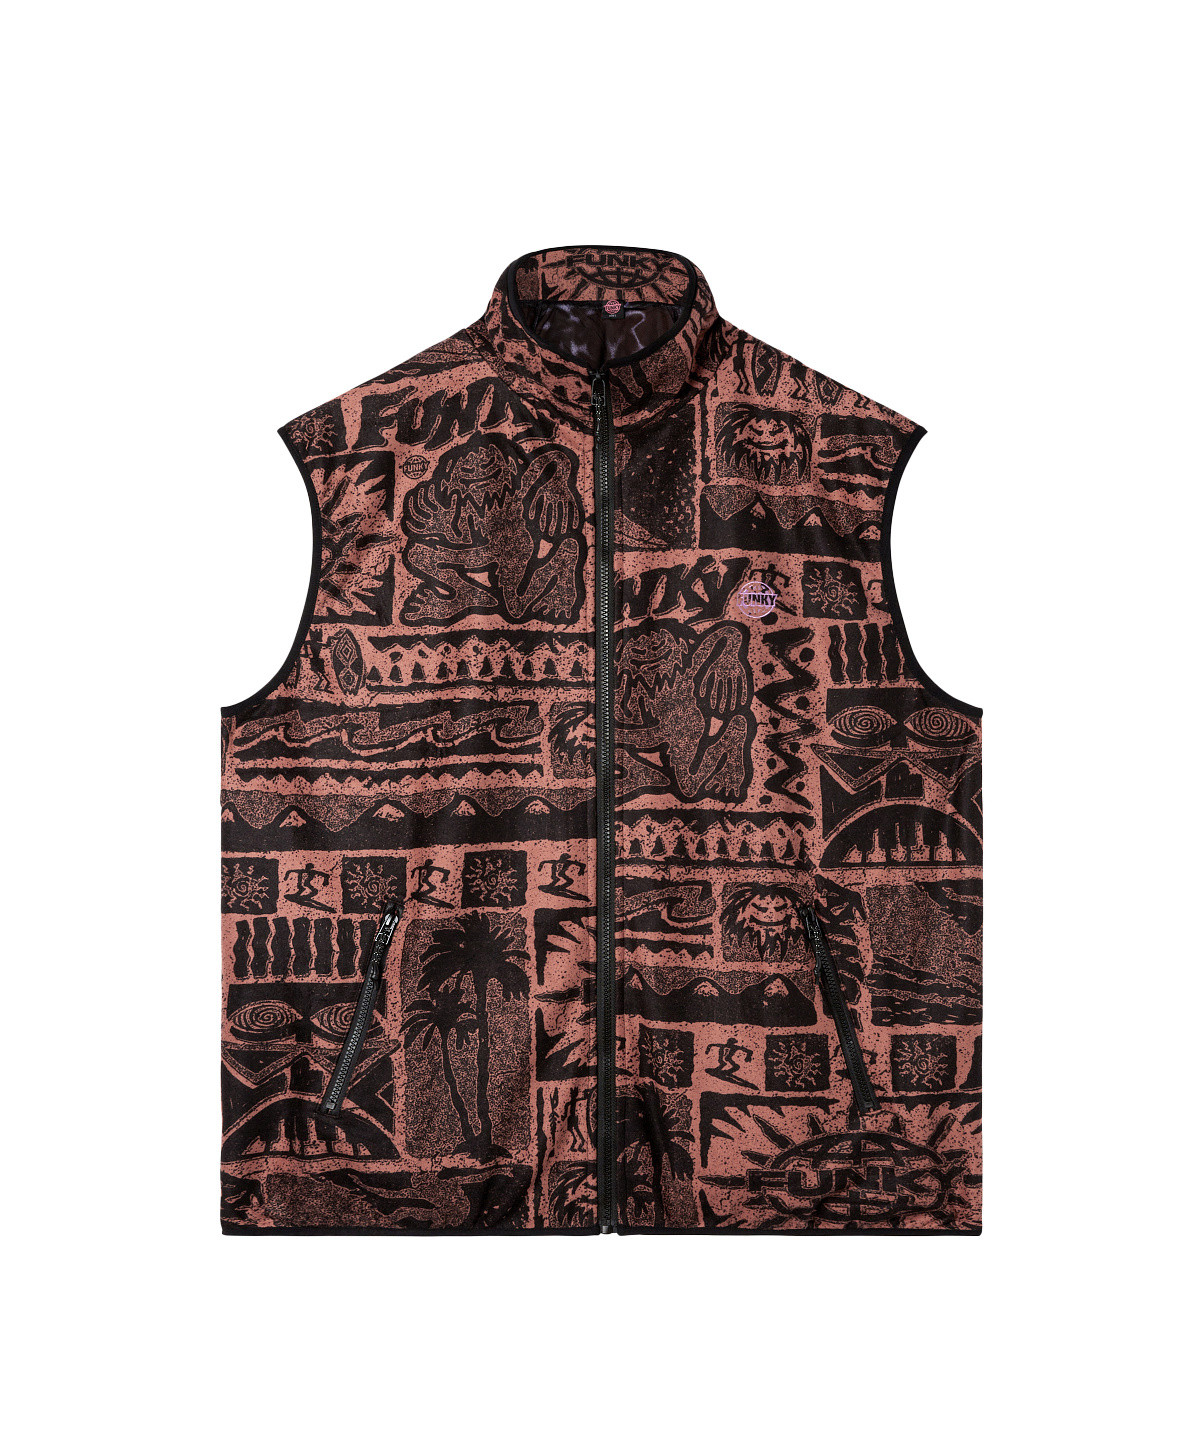 Funky - Gilet in pile motivo tribale, Marrone, large image number 0